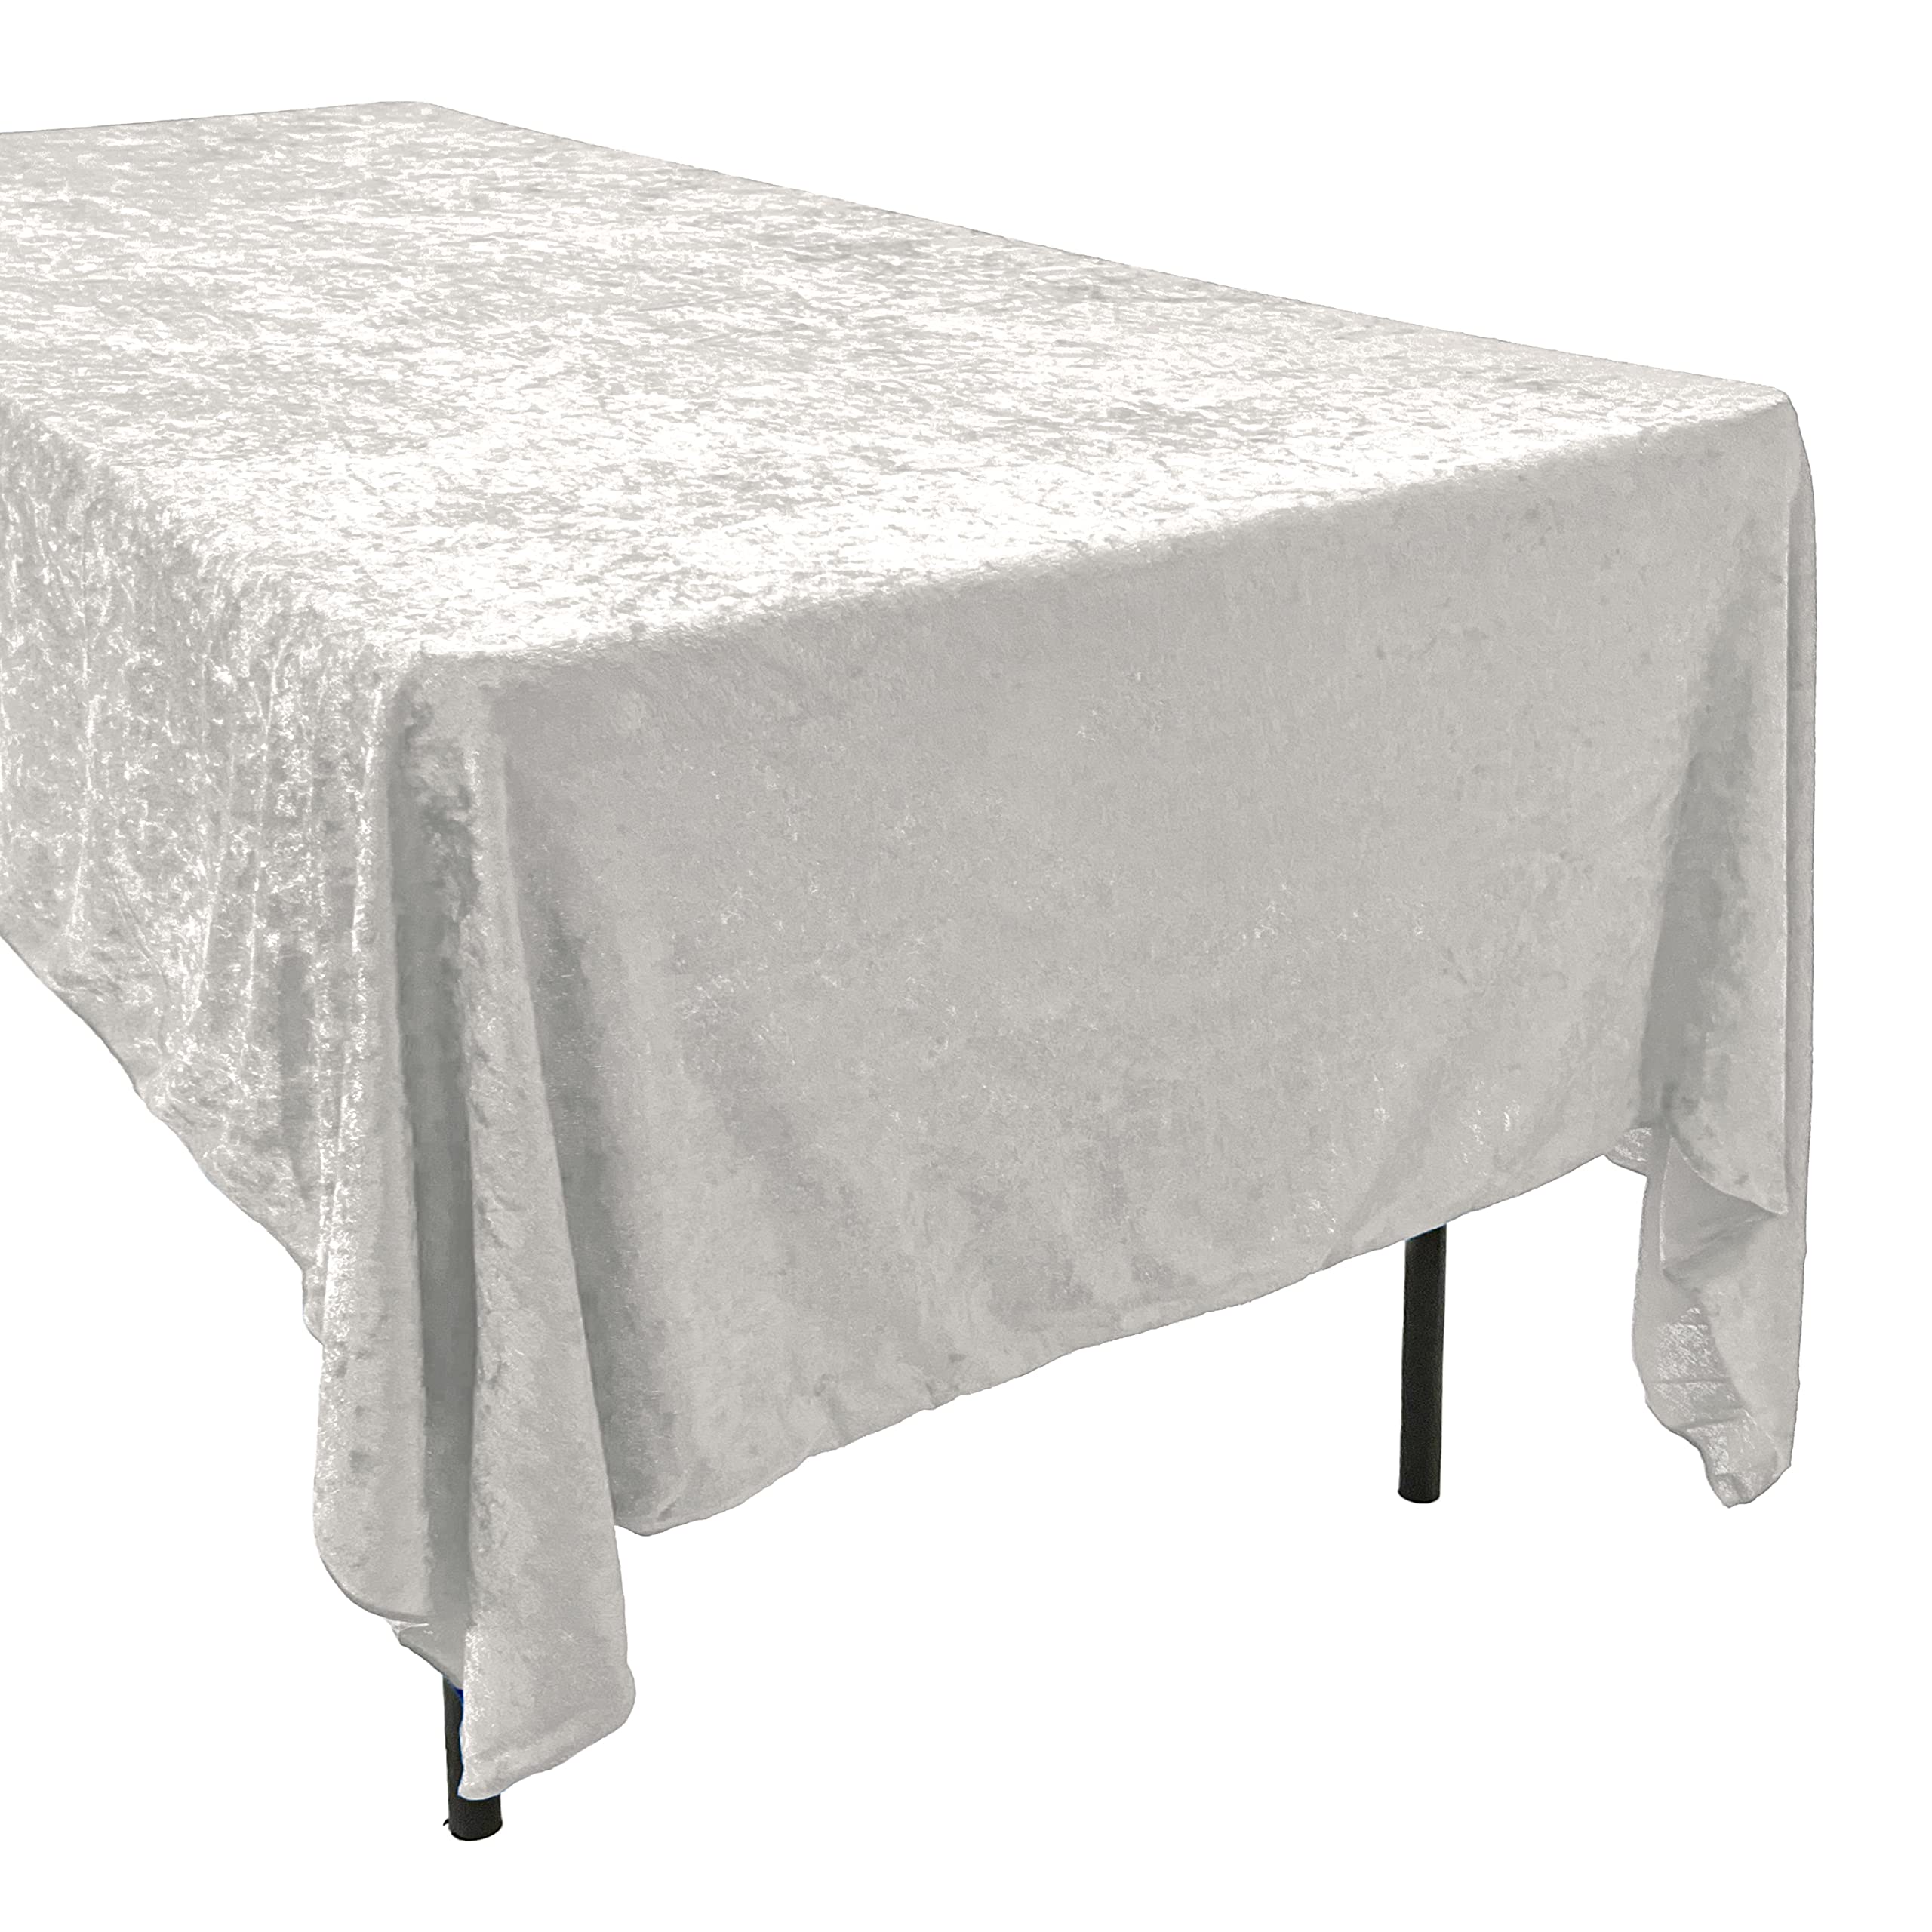 AK TRADING CO. Lush Panne Velvet Tablecloth - 60 x 102 Inch Rectangular Table Cover | Great for Buffet Table, Parties, Holiday Dinner, Wedding & Baby Shower (White, 60 x 102 Inch)